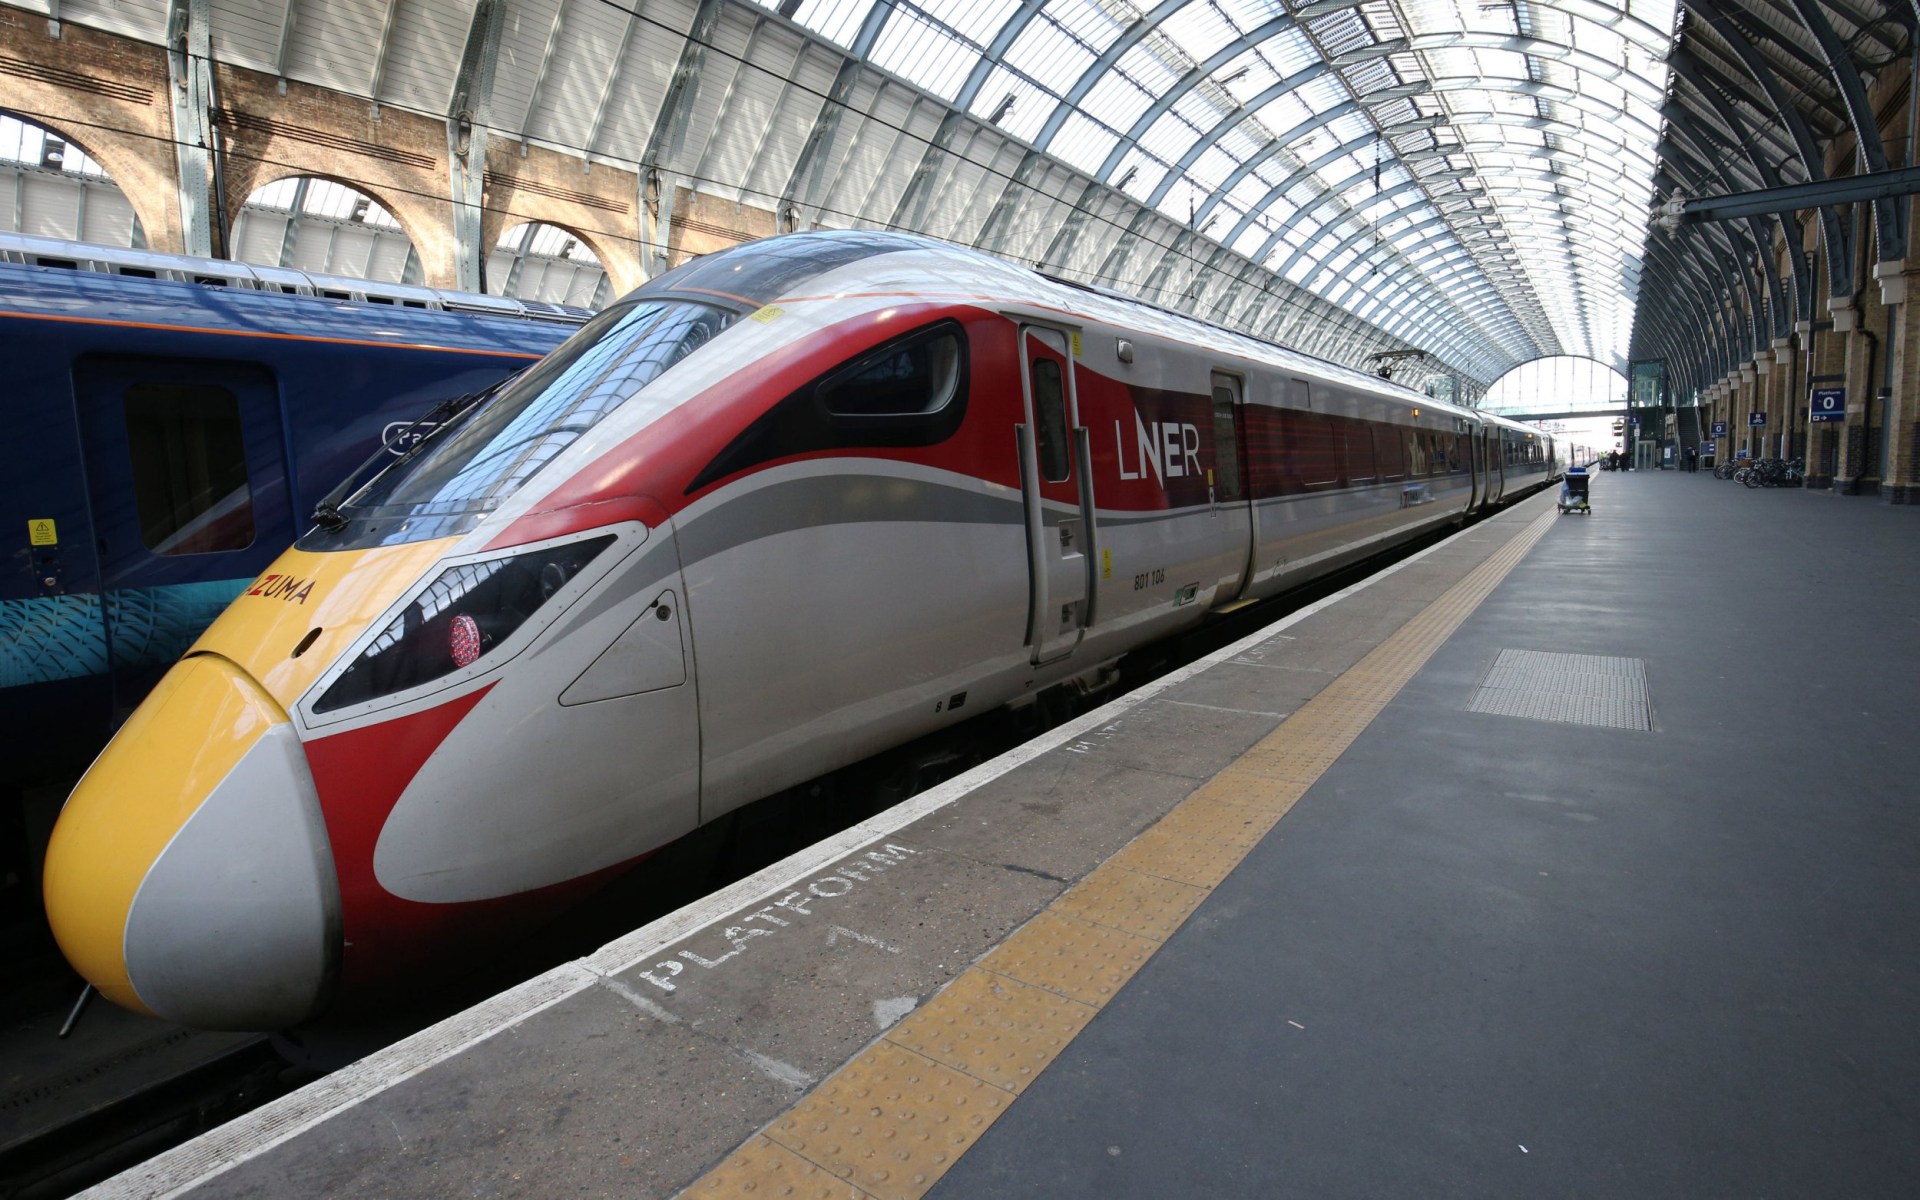 'simpler fares' trial adds £100 to popular train journeys